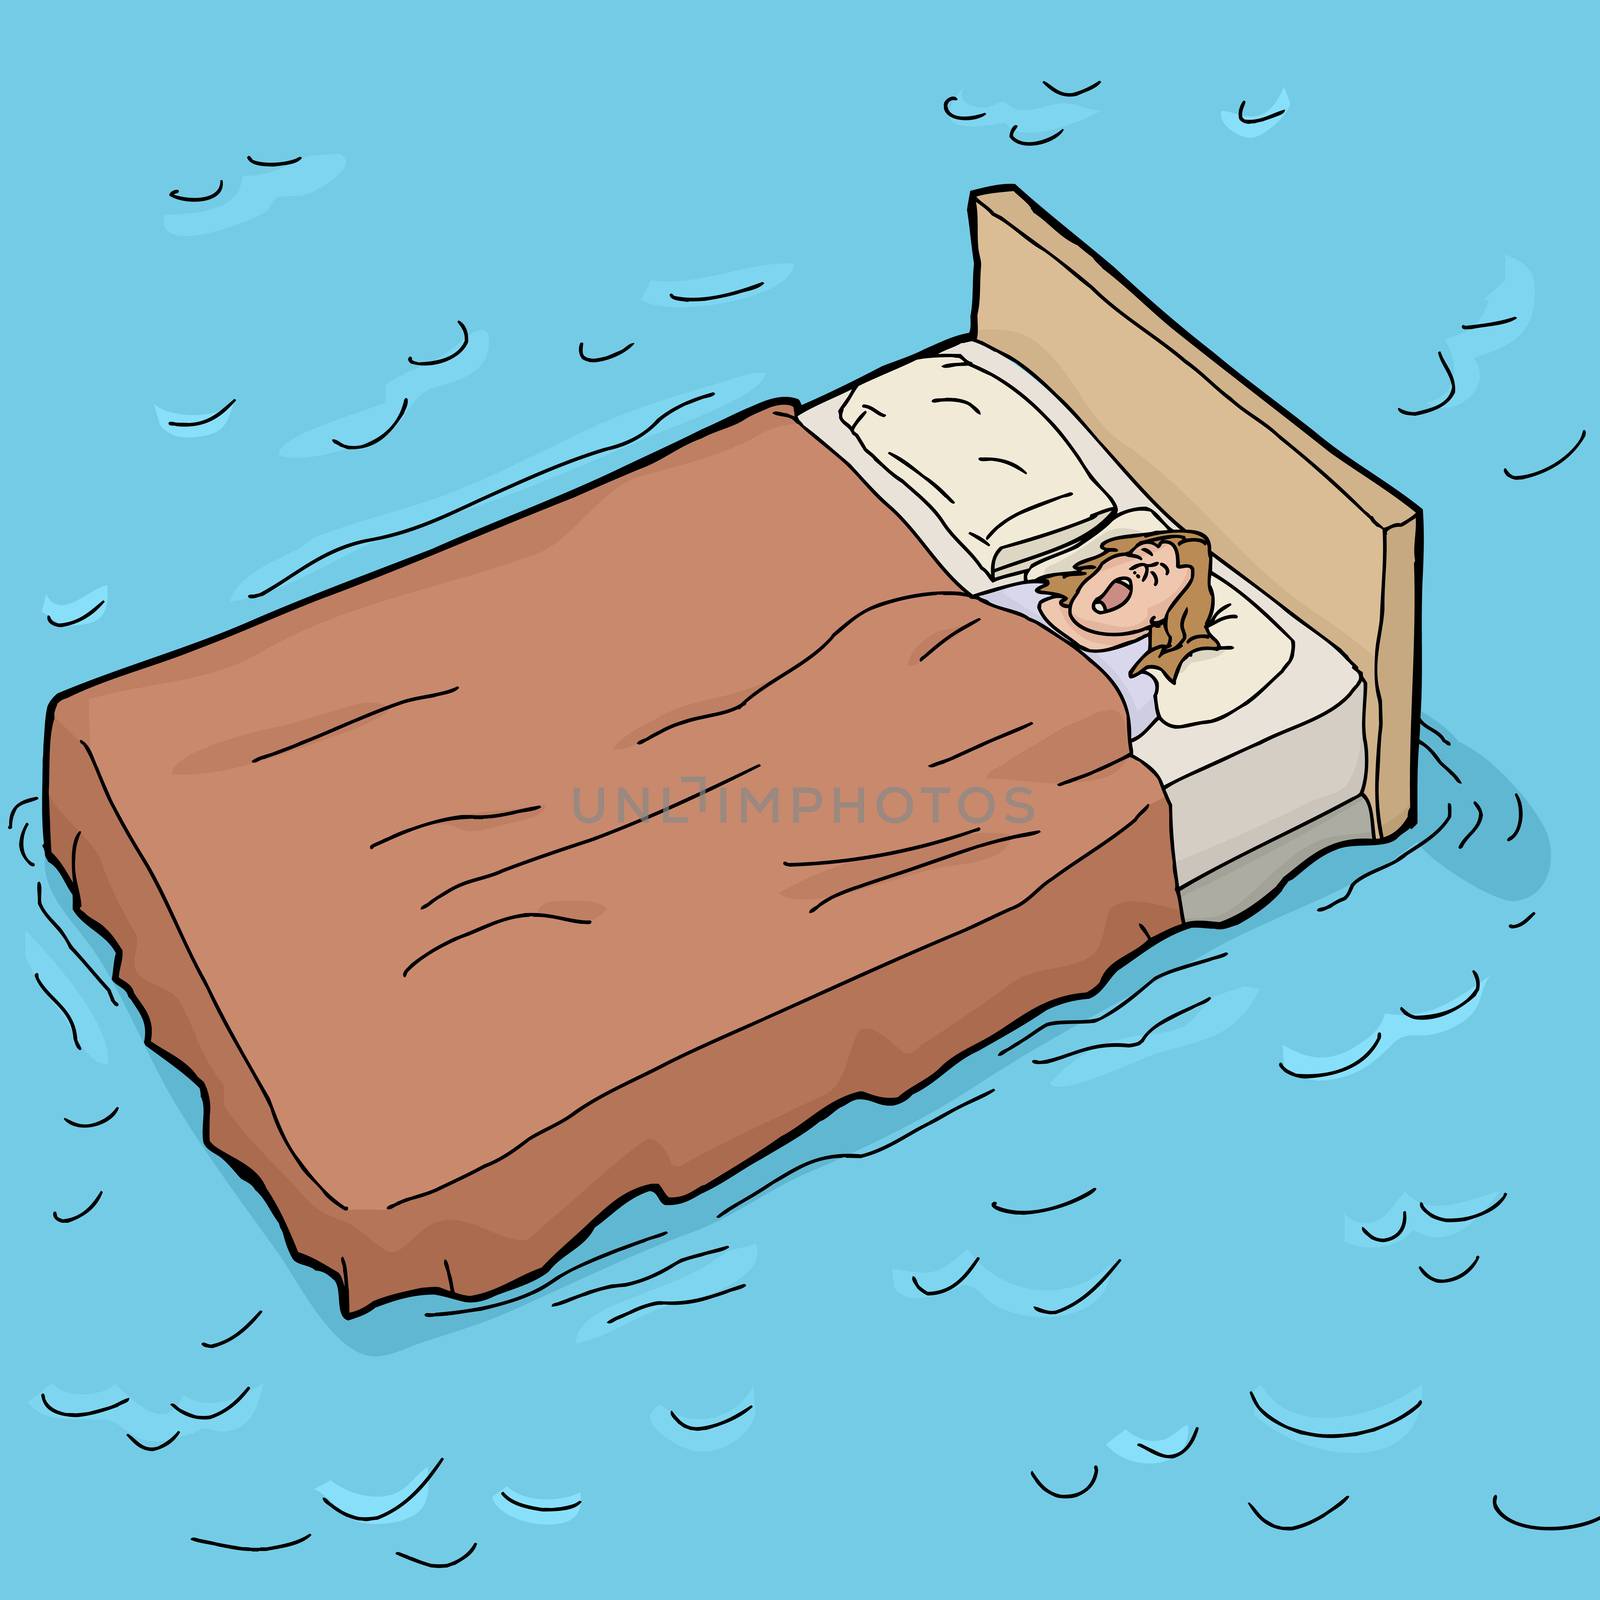 Sleeping on a Waterbed by TheBlackRhino